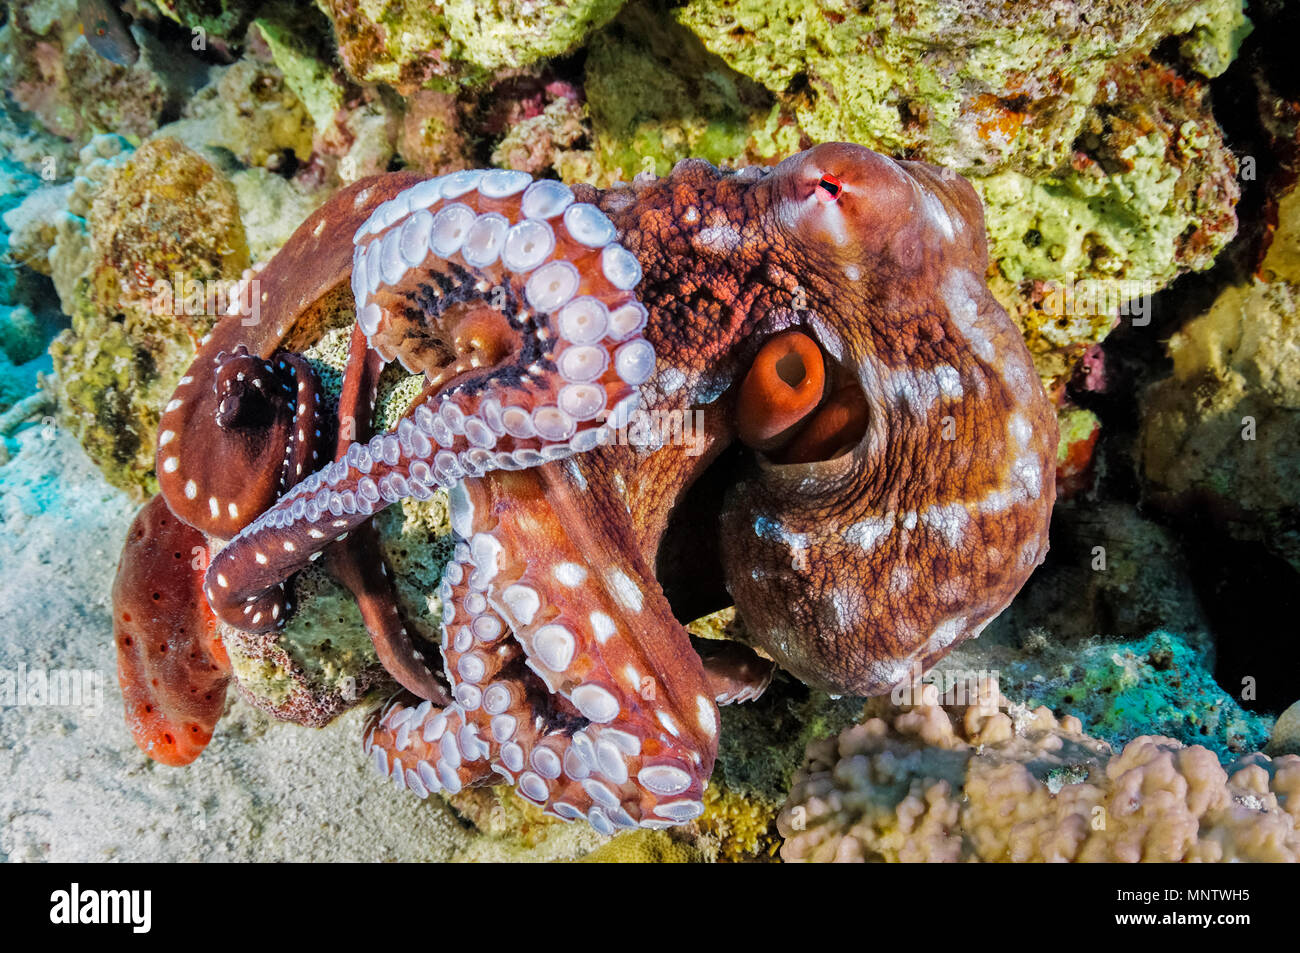 white-spotted octopus, Callistoctopus macropus, demonstrating its instant color change ability in sequence, Giftun Island Reef, Hurghada, Egypt, Red S Stock Photo